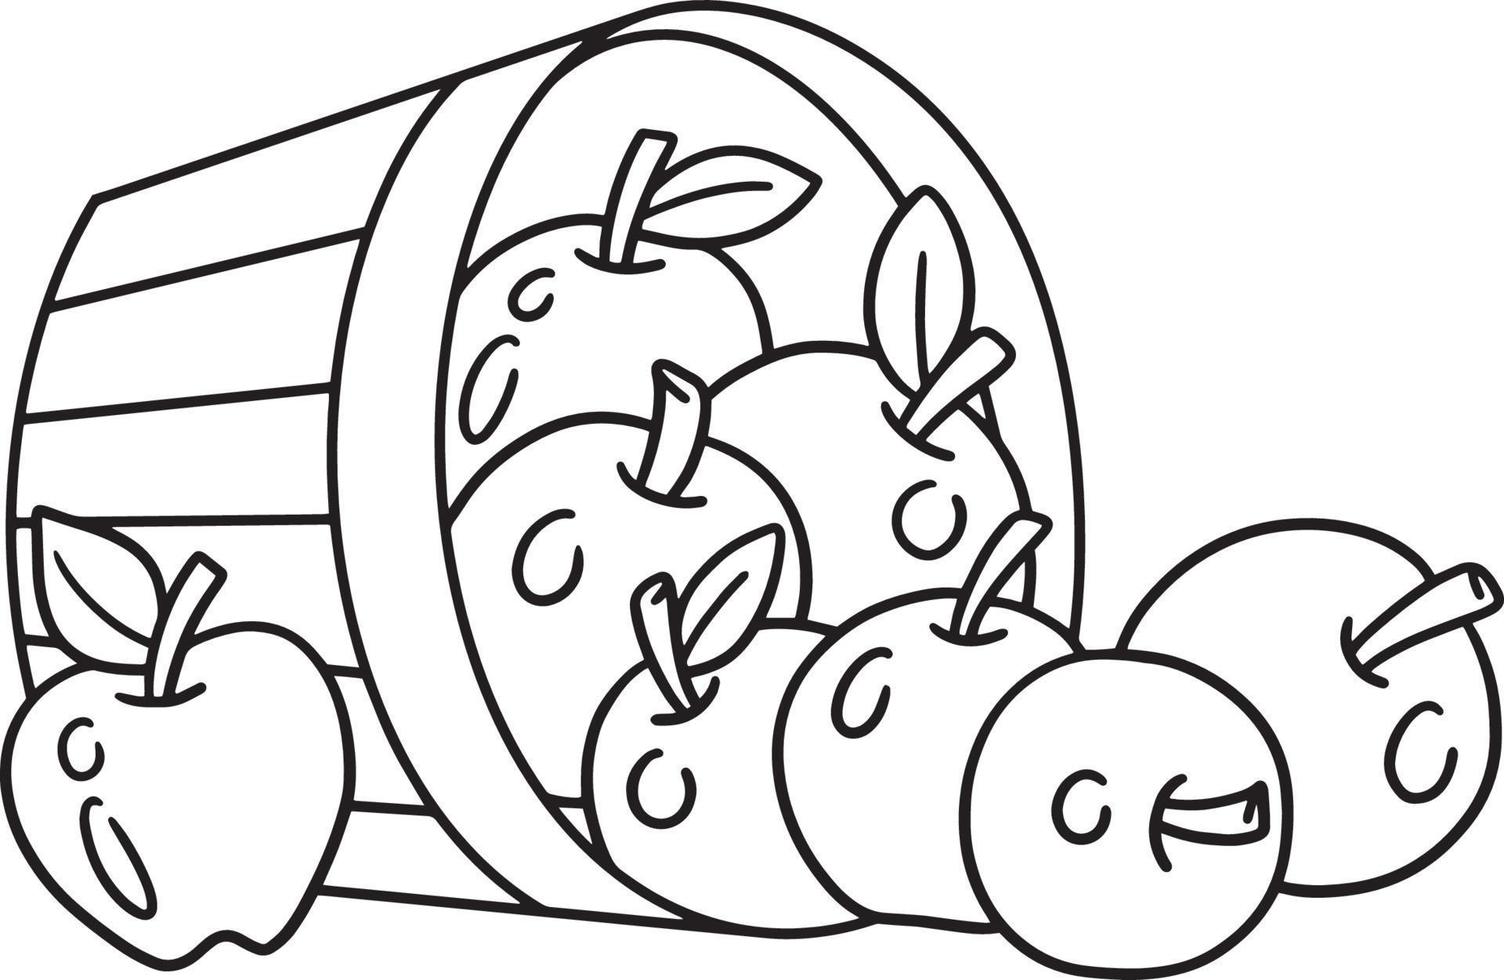 Thanksgiving Apple Isolated Coloring Page for Kids vector